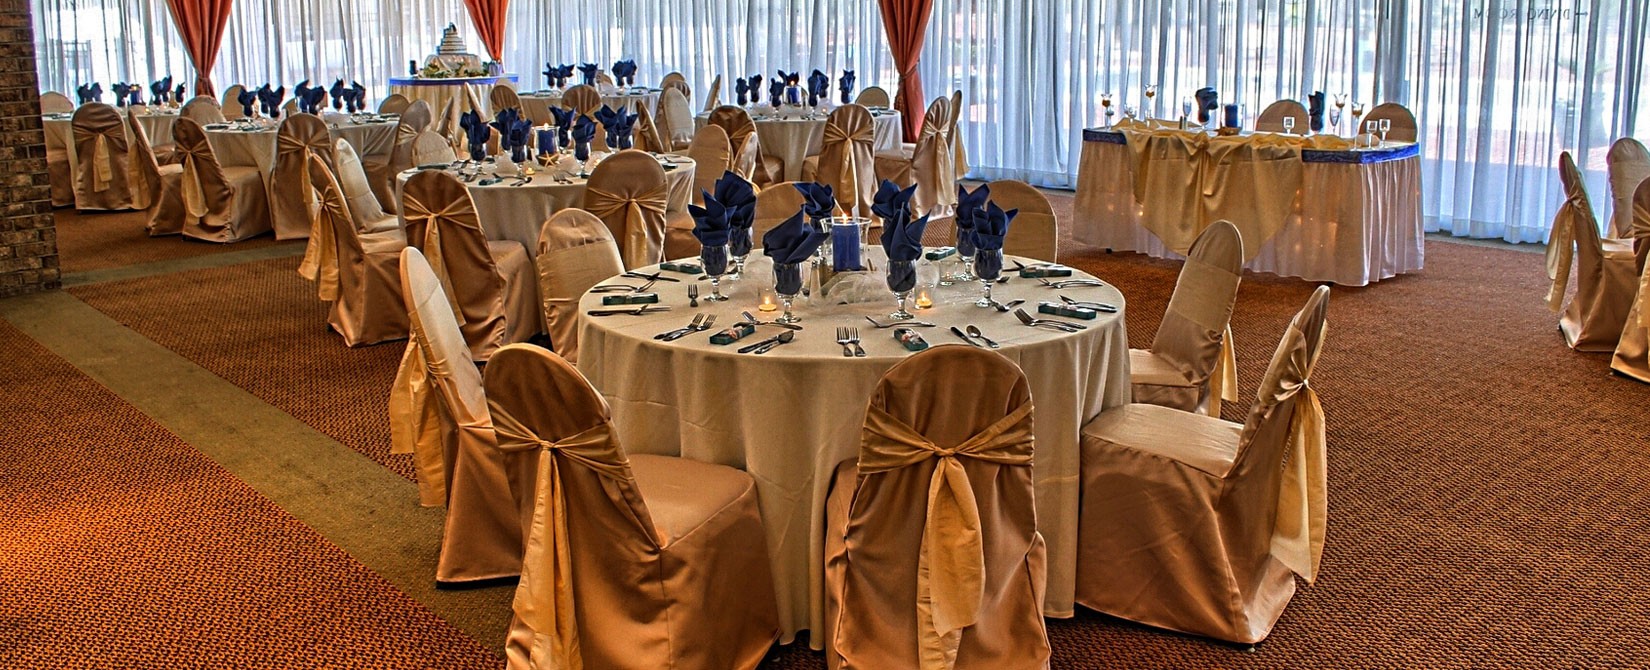 gold and navy wedding place settings and chair wraps at The Caravelle Resort